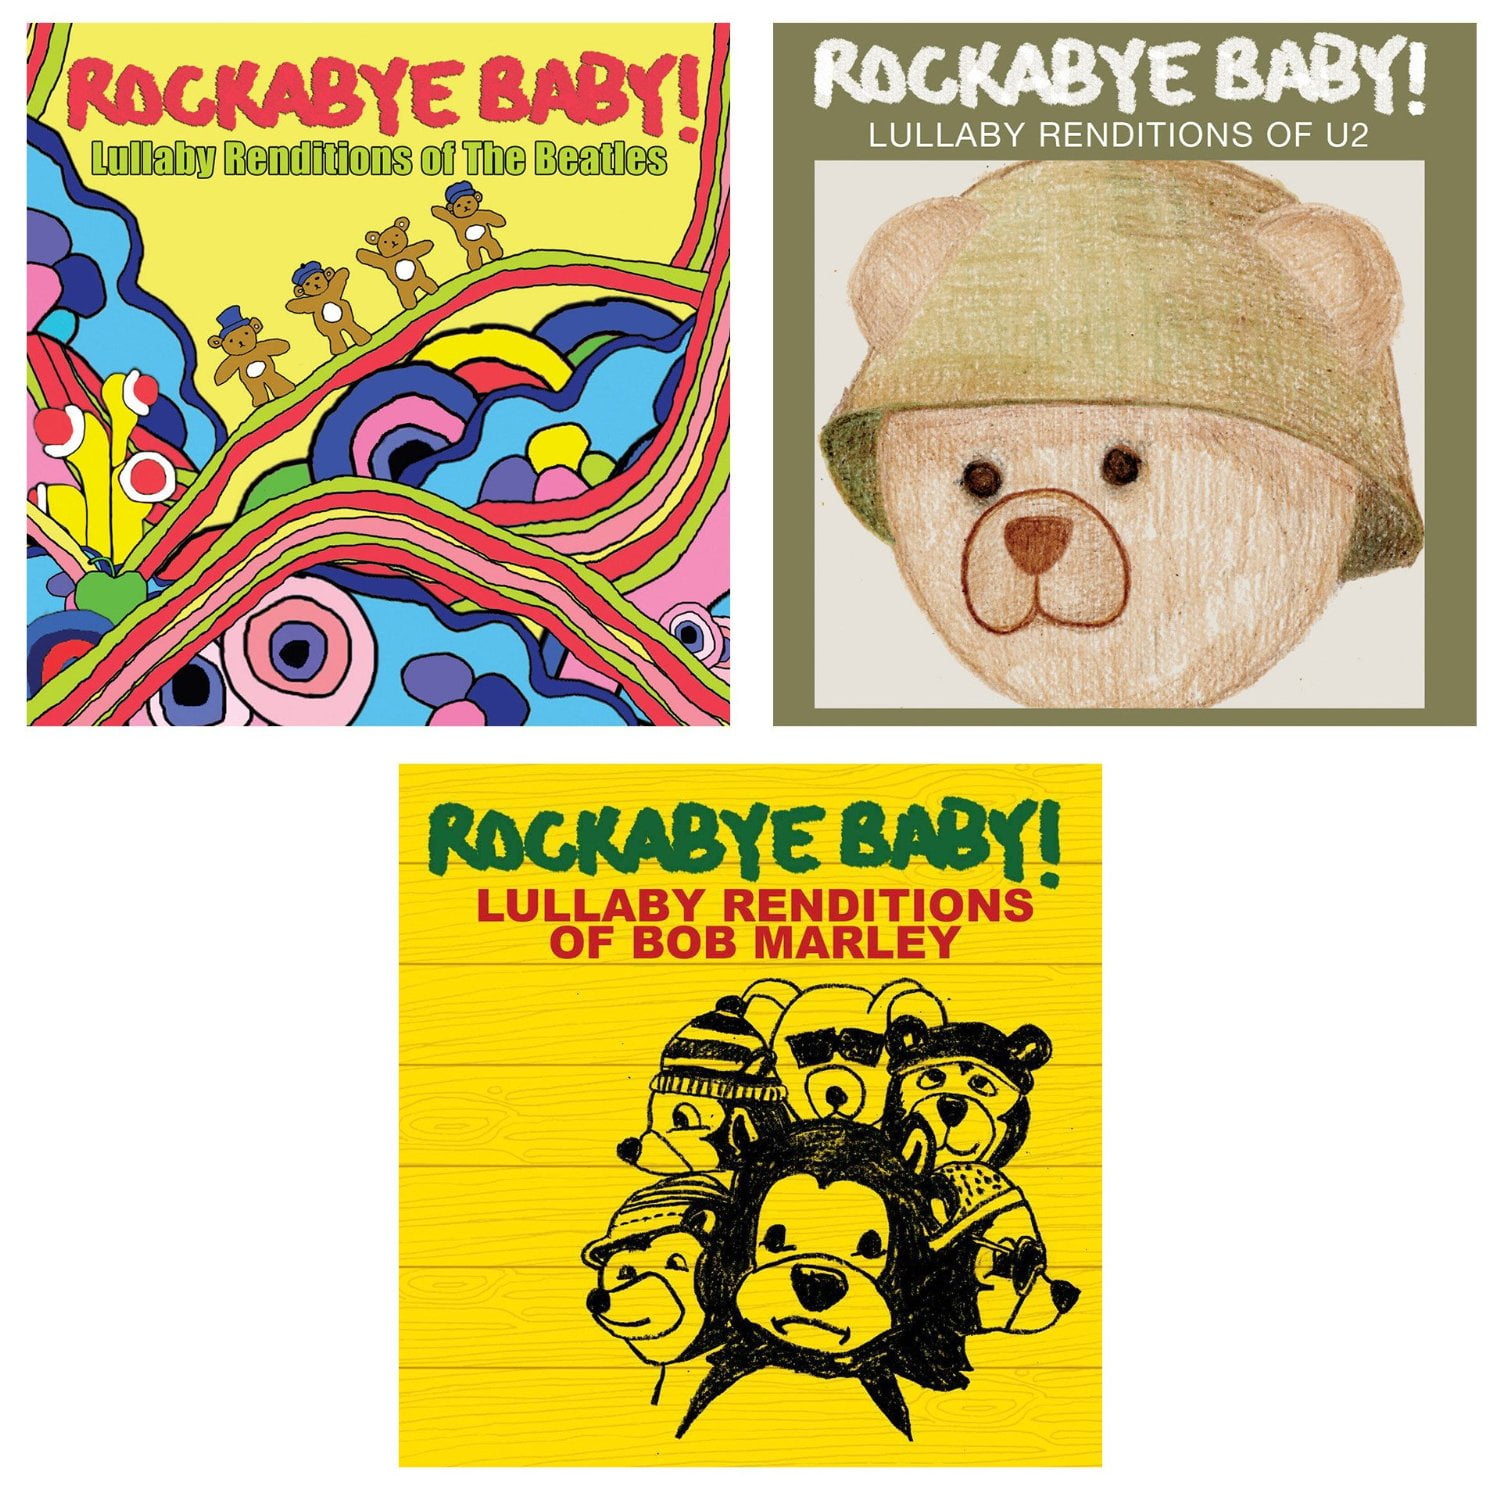 u2 lullaby renditions